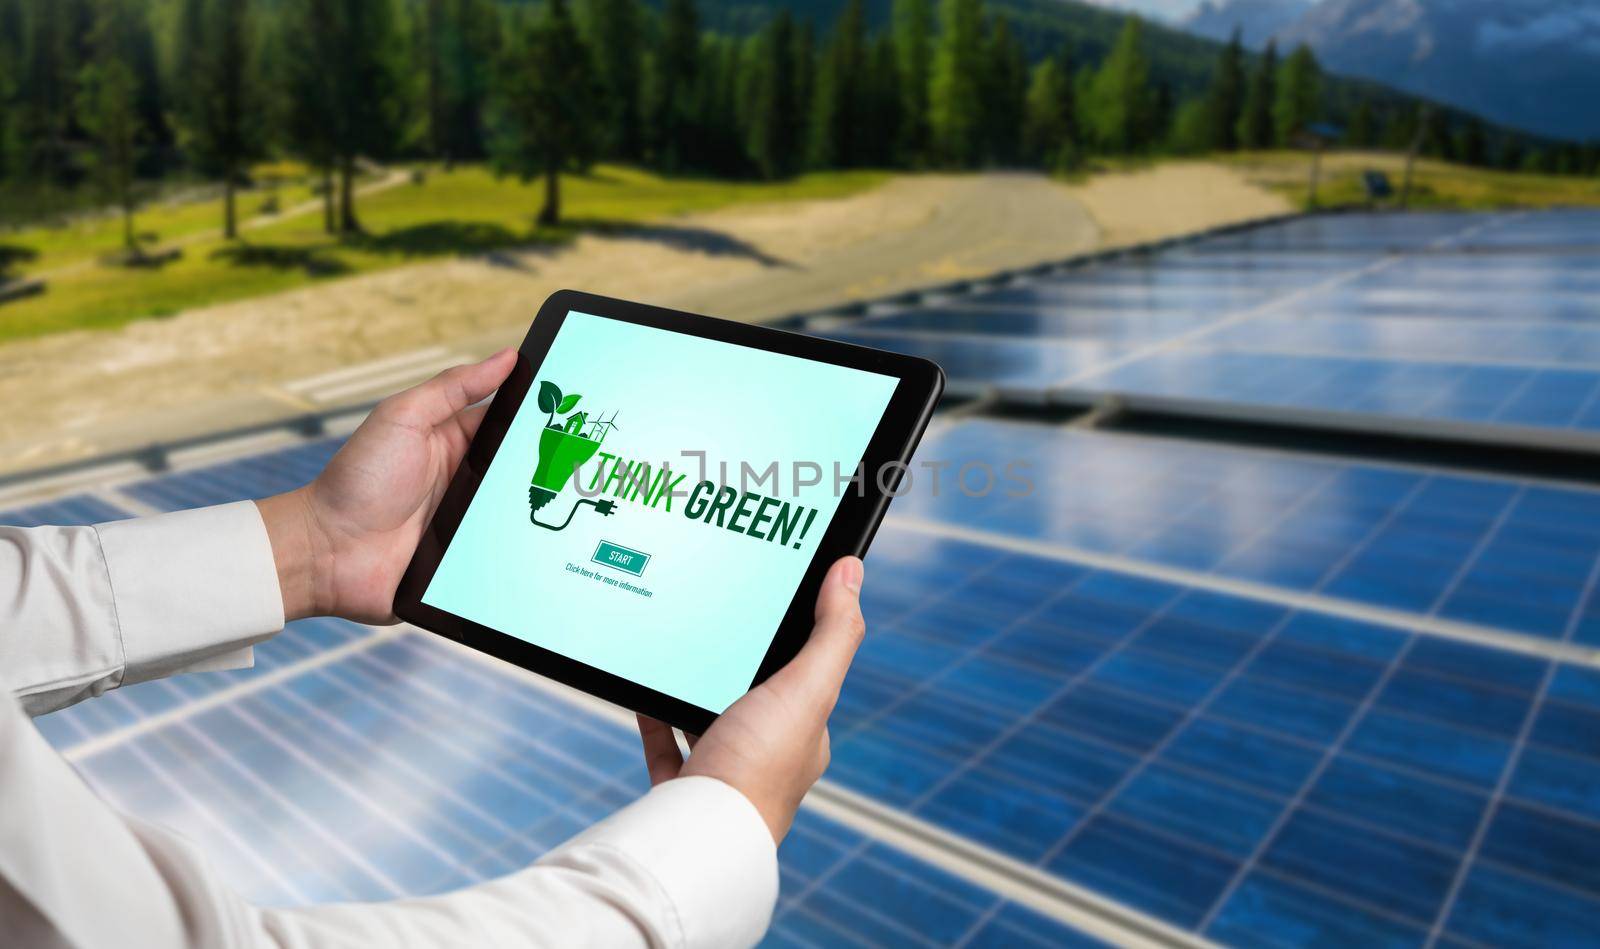 Green business transformation for environment saving and ESG business concept. Businessman using tablet to set corporate goal toward environmental friendly management and alternative clean energy use.